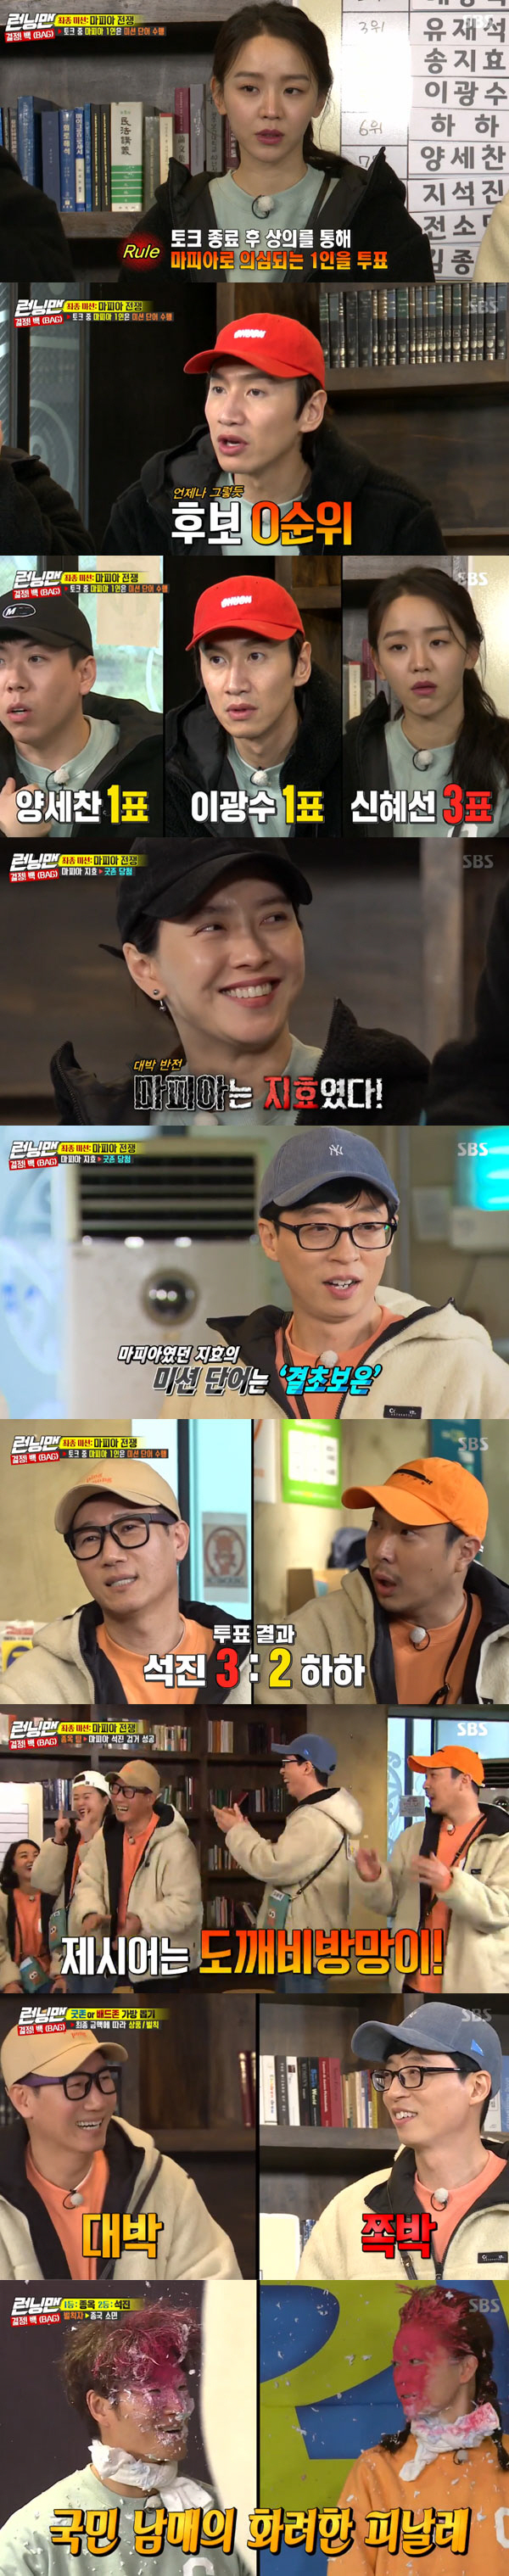 Running Man Bae Jong-ok wins final title in Decision! Back (BAG) RaceOn SBS Running Man broadcast on the 1st, Decision! Back (BAG) was missioned with Bae Jong-ok and Shin Hye-sun as guests.On this day, the Bae Jong-ok team and Shin Hye-sun team were divided into missions, and the first mission was to play human bowling on the sticky plate with sweet guys.First, Ji Suk-jin of the Bae Jong-ok team and Lee Kwang-soo of the Shin Hye-sun team challenged.However, the stickys strong adhesion failed, and Shin Hye-suns Kim Jong-kook succeeded in knocking down one.The failure continued after that, while Bae Jong-ok and Shin Hye-sun succeeded in knocking down seven.The Bae Jong-ok team then scored nine and the Bae Jong-ok team won the first round with 16 to 8.The Bae Jong-ok team went to Good Zone and the Shin Hye-sun team pulled a bag from the bad zone. As a result, Bae Jong-ok picked up +70,000 won and climbed to the top with 80,000 won.On the other hand, Kim Jong-kook won -200,000 won and was ranked 10th with -150,000 won.The second round is Nunchibab auction, which adds up the food auction by round and more teams win.The first round was a draw, and the second and third rounds were won by Shin Hye-sun, winning pizza and jajangmyeon.The third round was a victory for the Bae Jong-ok team, but the second round was a victory for the Shin Hye-sun team due to overwhelming price differences.Shin Hye-sun team went on to draw bags in Good Zone, Bae Jong-ok team pulled bags in Bad Zone, and Shin Hye-sun finished first with 120,000 won, Kim Jong-kook picked + 1,000 won, and finished second round with -149,000 won.The final mission is the Mafia War, in which one Mafia during the talk must perform the mission word; after the talk is terminated, a prize votes for one suspected Mafia.Mafia is a victory for the citizen in the success of the arrest, Mafia in the failure of the arrest.The members conducted a daily talk to arrest Mafia, and then got one vote for Yang Se-chan, one for Lee Kwang-soo, and three for Shin Hye-sun.But the real Mafia was Song Ji-hyo; also the Mafia word Odintsovo.Song Ji-hyo had succeeded in speaking of Odintsovo with the help of Yoo Jae-Suk; in the second round, he succeeded in arresting Mafia.Mafia was Ji Suk-jin, and the Mafia word was a goblin bat.The final bag was drawn, and the final result was Bae Jong-ok, and Ji Suk-jin, the second place, won the al ring.On the other hand, Kim Jong-kook and Jeon So-min were in 10th and 9th place, and received the final fresh cream penalty.